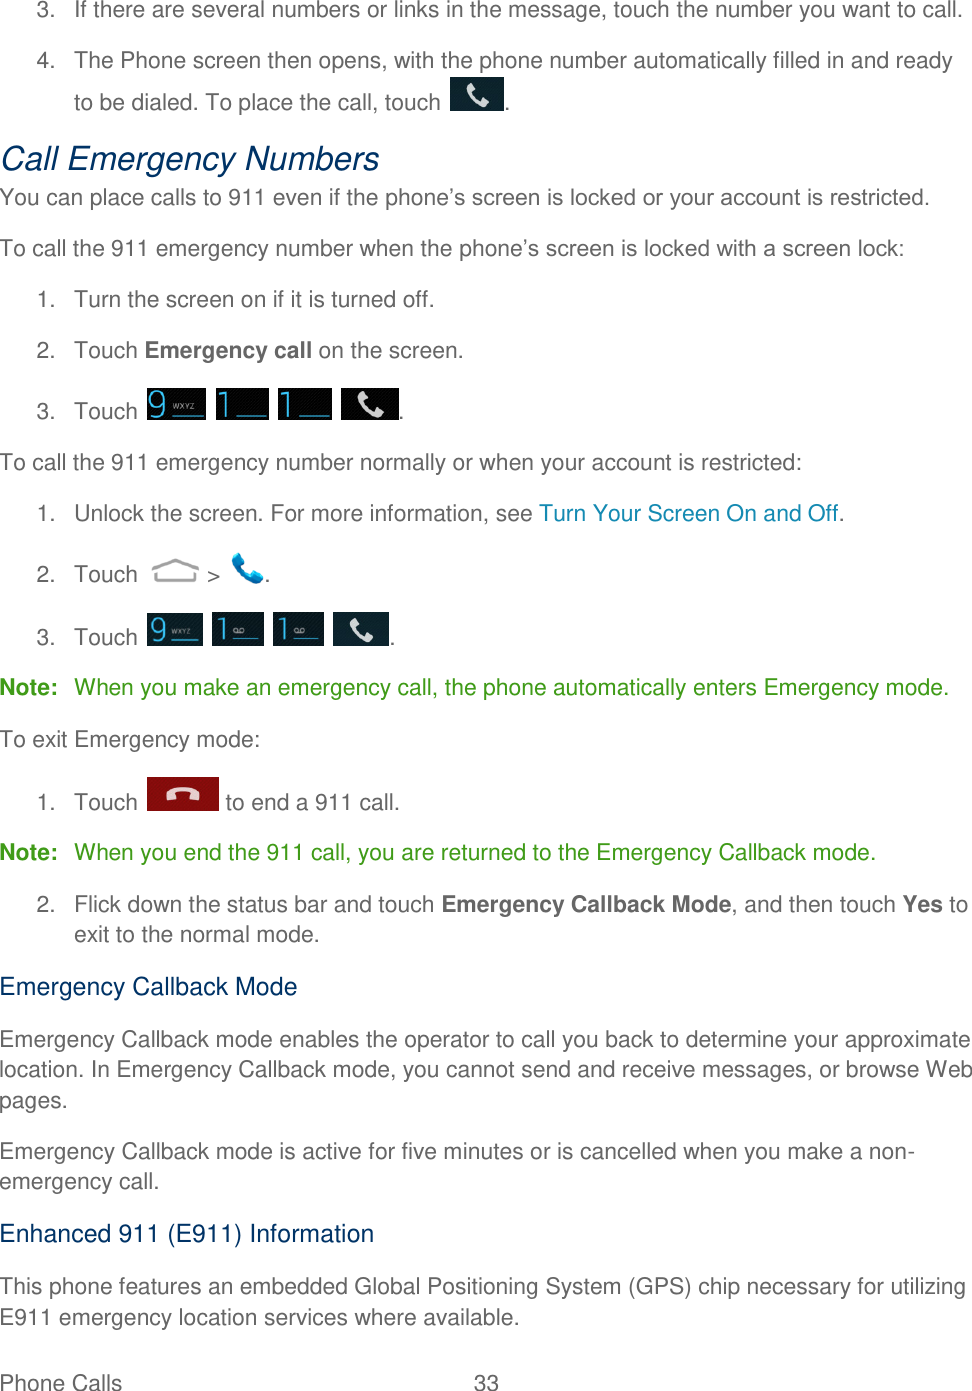 Phone Calls  33   3.  If there are several numbers or links in the message, touch the number you want to call. 4.  The Phone screen then opens, with the phone number automatically filled in and ready to be dialed. To place the call, touch  . Call Emergency Numbers You can place calls to 911 even if the phone‟s screen is locked or your account is restricted. To call the 911 emergency number when the phone‟s screen is locked with a screen lock: 1.  Turn the screen on if it is turned off. 2.  Touch Emergency call on the screen. 3.  Touch        . To call the 911 emergency number normally or when your account is restricted: 1.  Unlock the screen. For more information, see Turn Your Screen On and Off. 2.  Touch   &gt;  . 3.  Touch        . Note:  When you make an emergency call, the phone automatically enters Emergency mode. To exit Emergency mode: 1.  Touch   to end a 911 call. Note:  When you end the 911 call, you are returned to the Emergency Callback mode. 2.  Flick down the status bar and touch Emergency Callback Mode, and then touch Yes to exit to the normal mode. Emergency Callback Mode Emergency Callback mode enables the operator to call you back to determine your approximate location. In Emergency Callback mode, you cannot send and receive messages, or browse Web pages. Emergency Callback mode is active for five minutes or is cancelled when you make a non-emergency call. Enhanced 911 (E911) Information This phone features an embedded Global Positioning System (GPS) chip necessary for utilizing E911 emergency location services where available. 